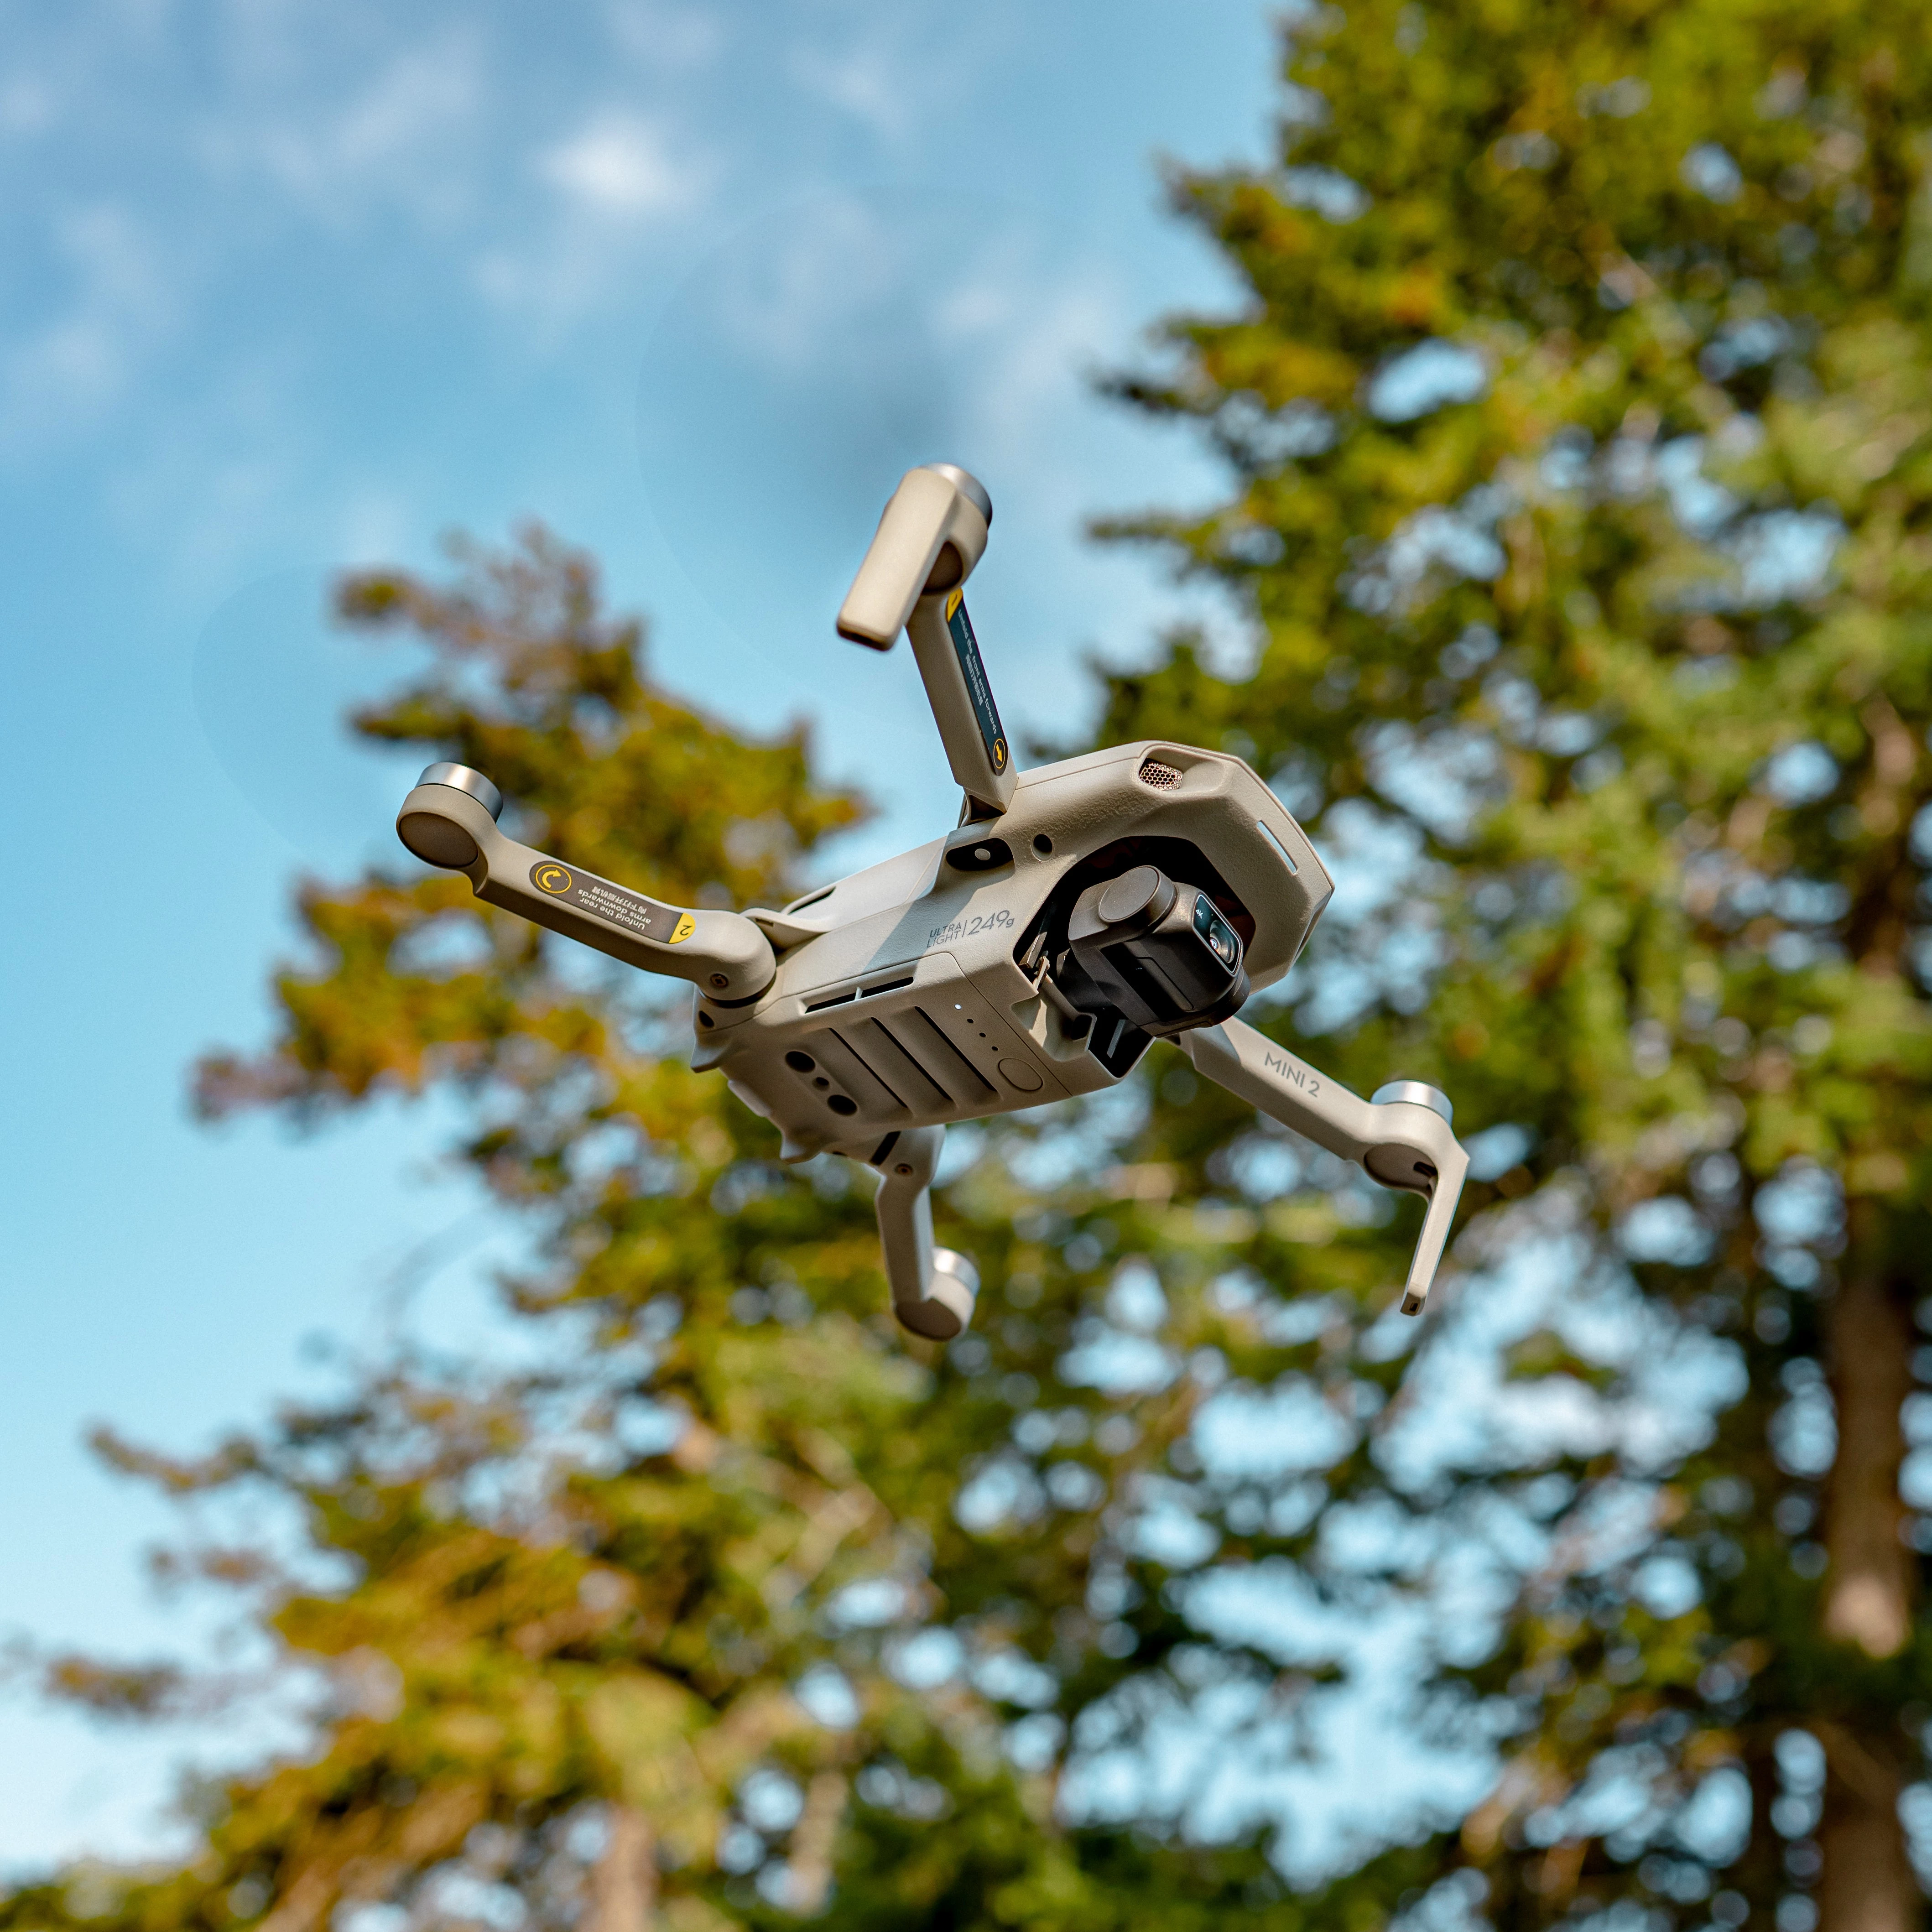 A drone flying in an area of woodland